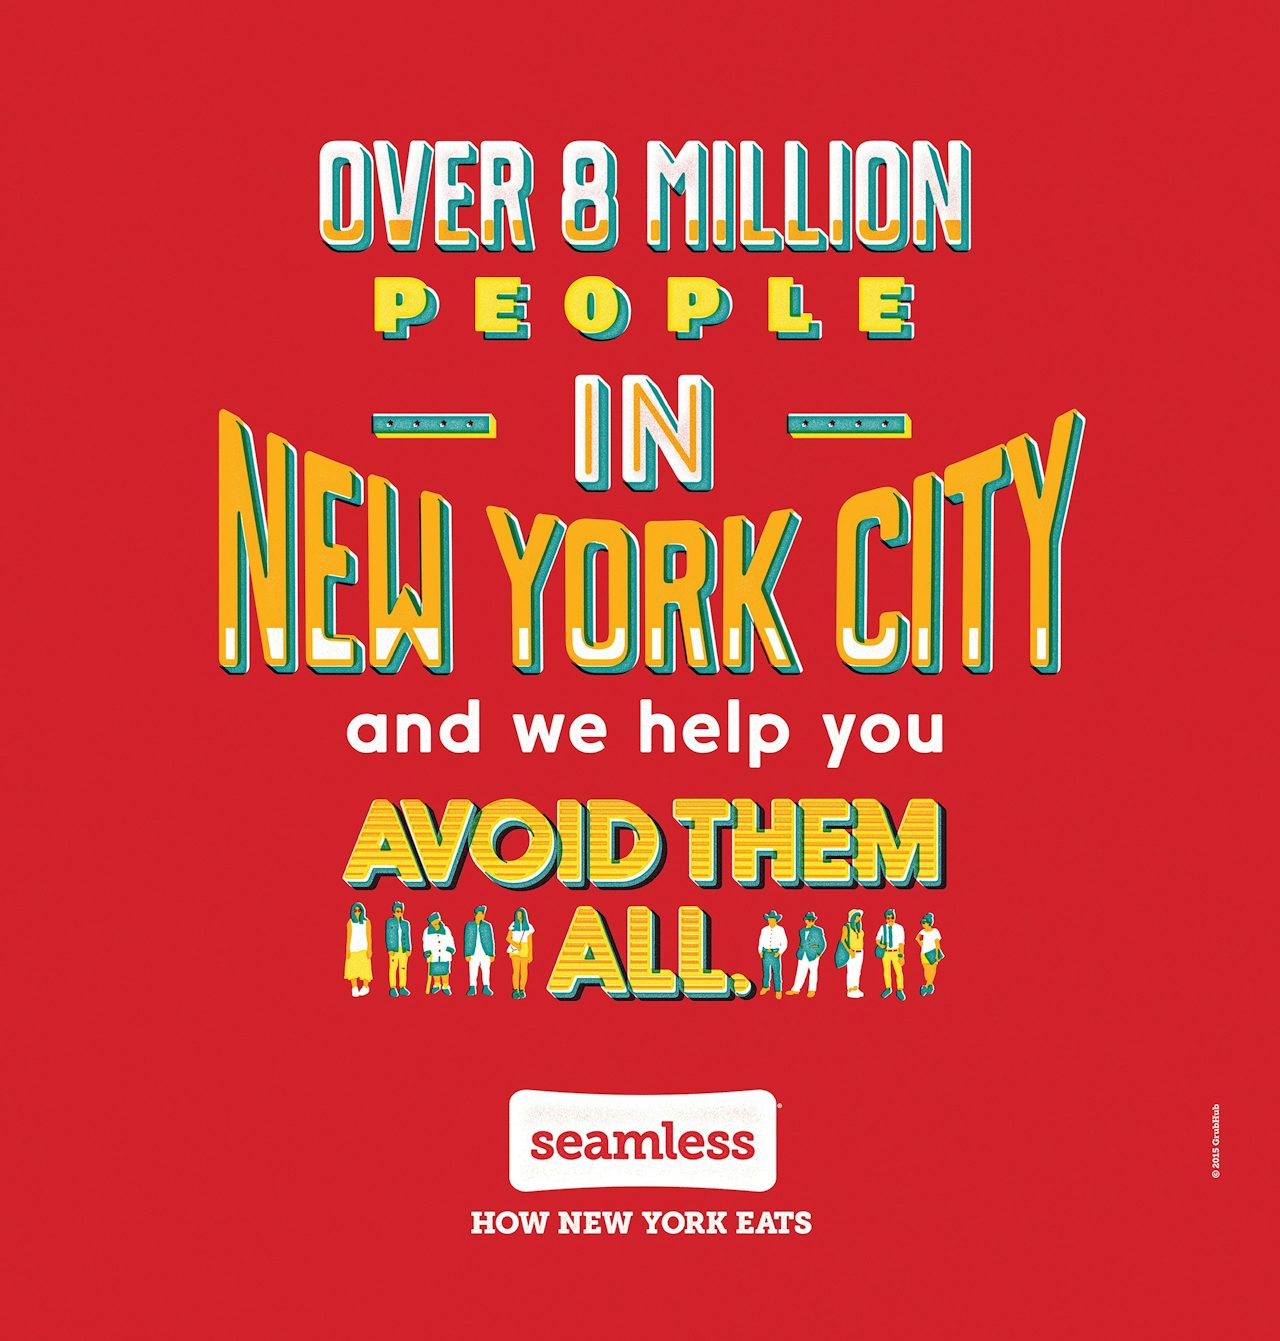 Seamless ads encourage you to be terrible to strangers